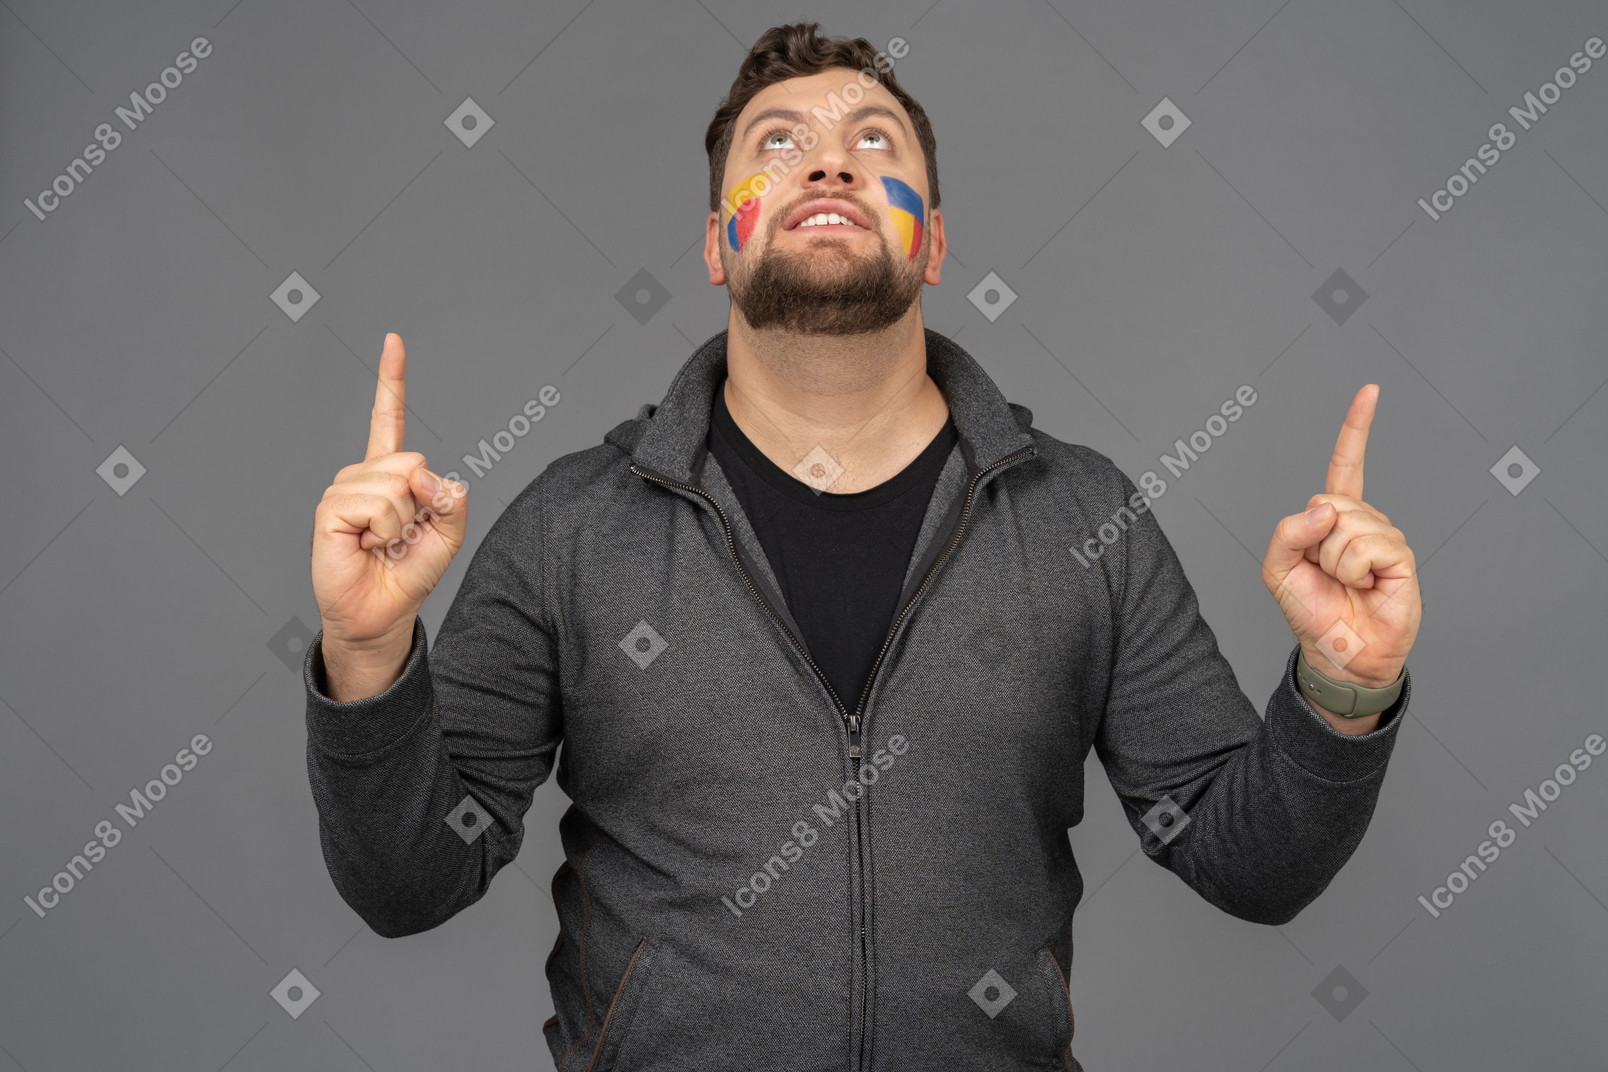 Front view of a male football fan with colorful face art raising fingers